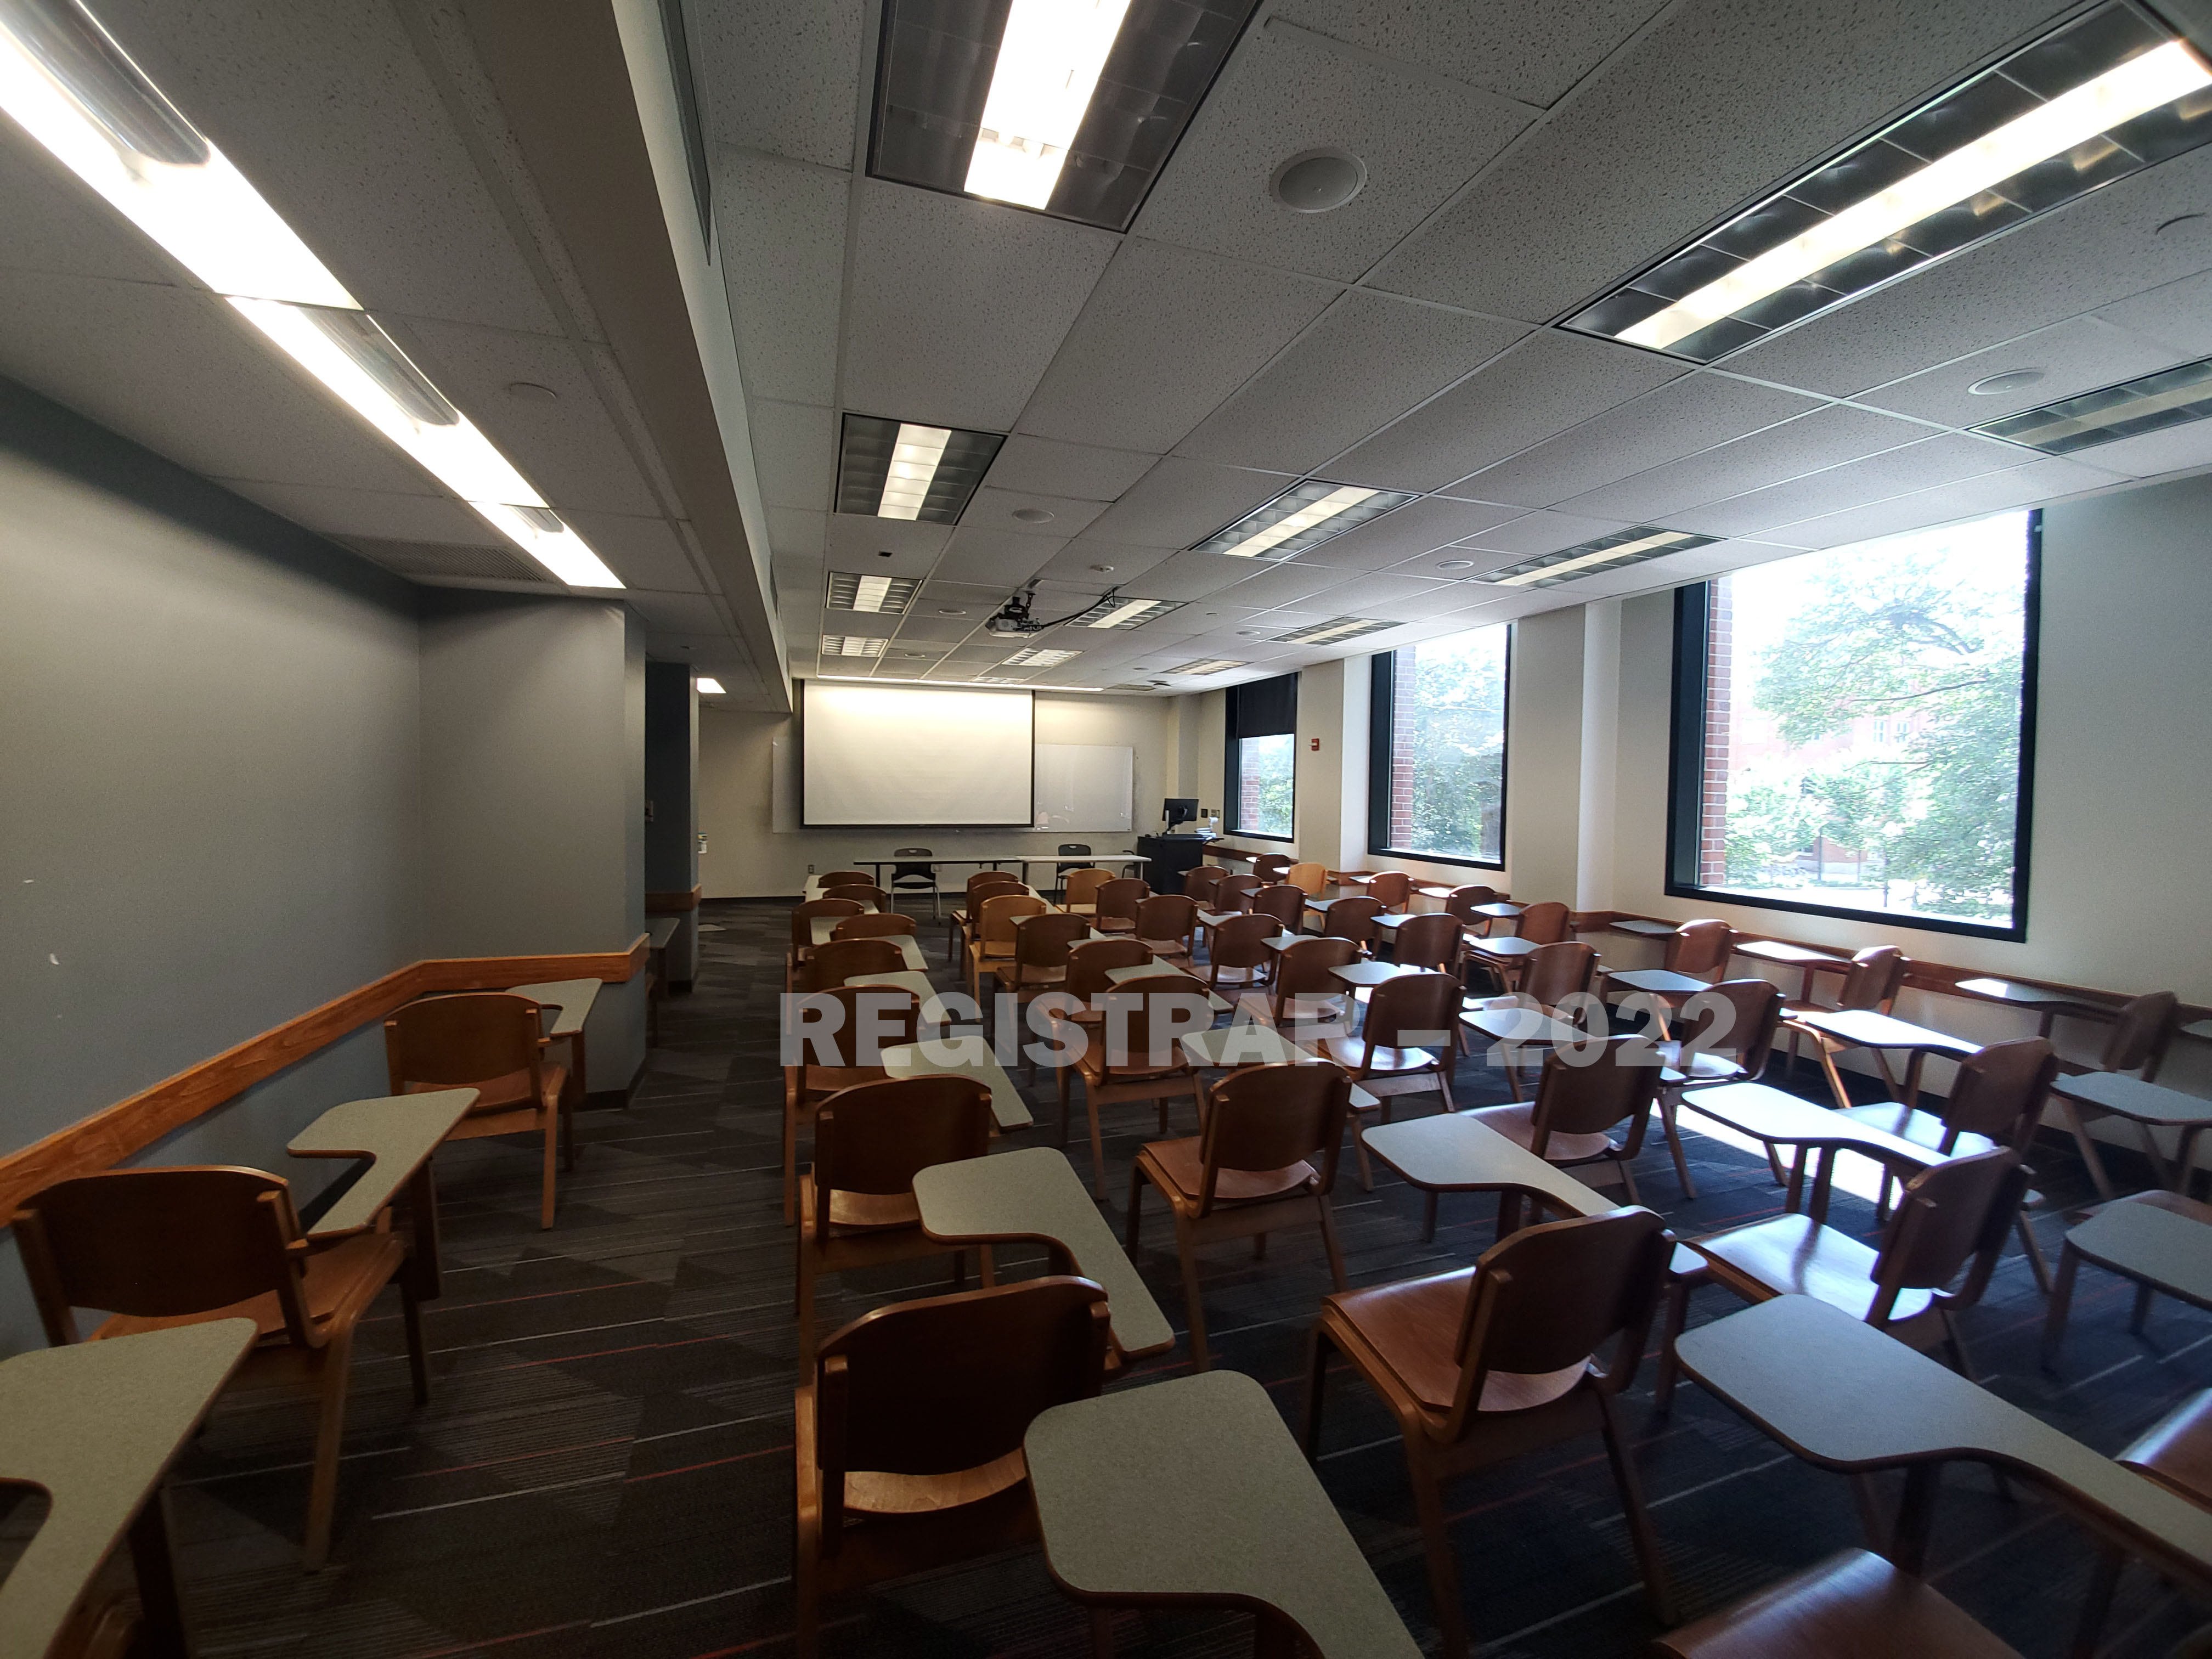 McPherson Chemical Lab room 2019 ultra wide angle view from the back of the room with projector screen down